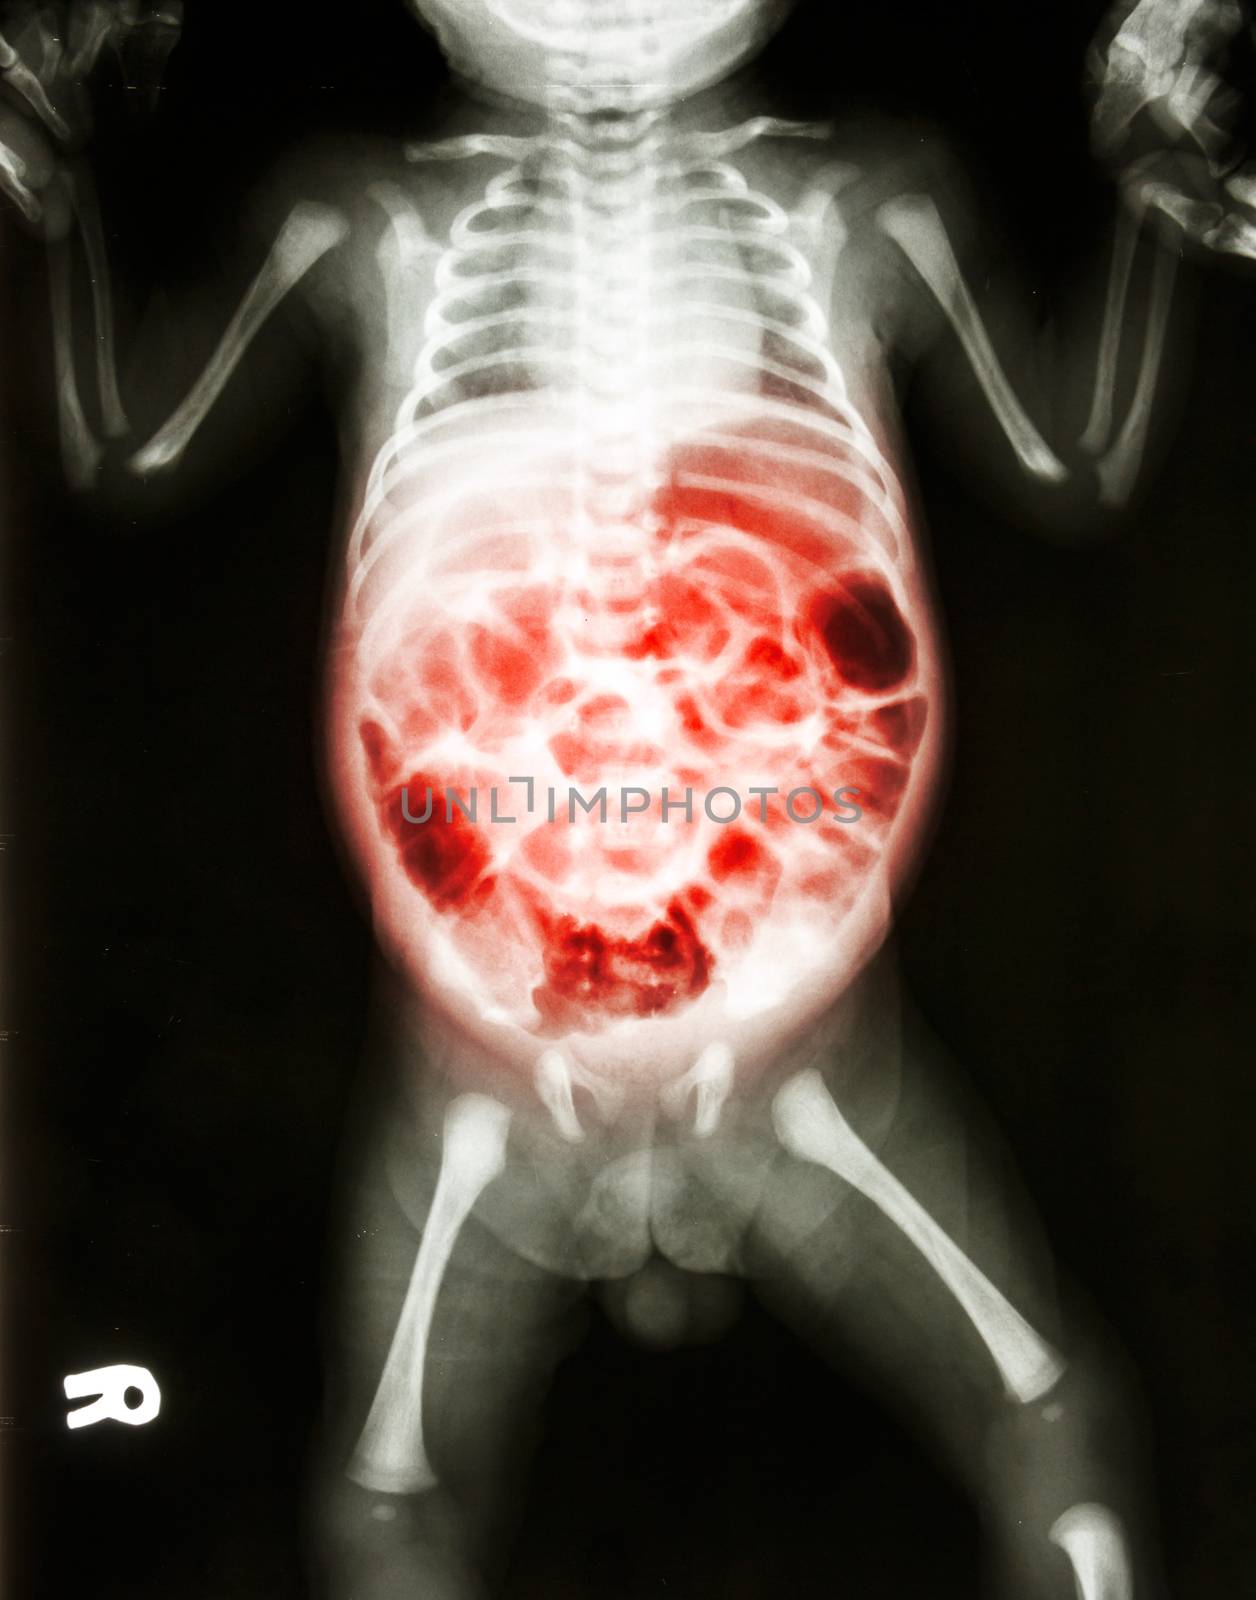 Enteritis (X-ray of sick infant and inflammation of intestine)